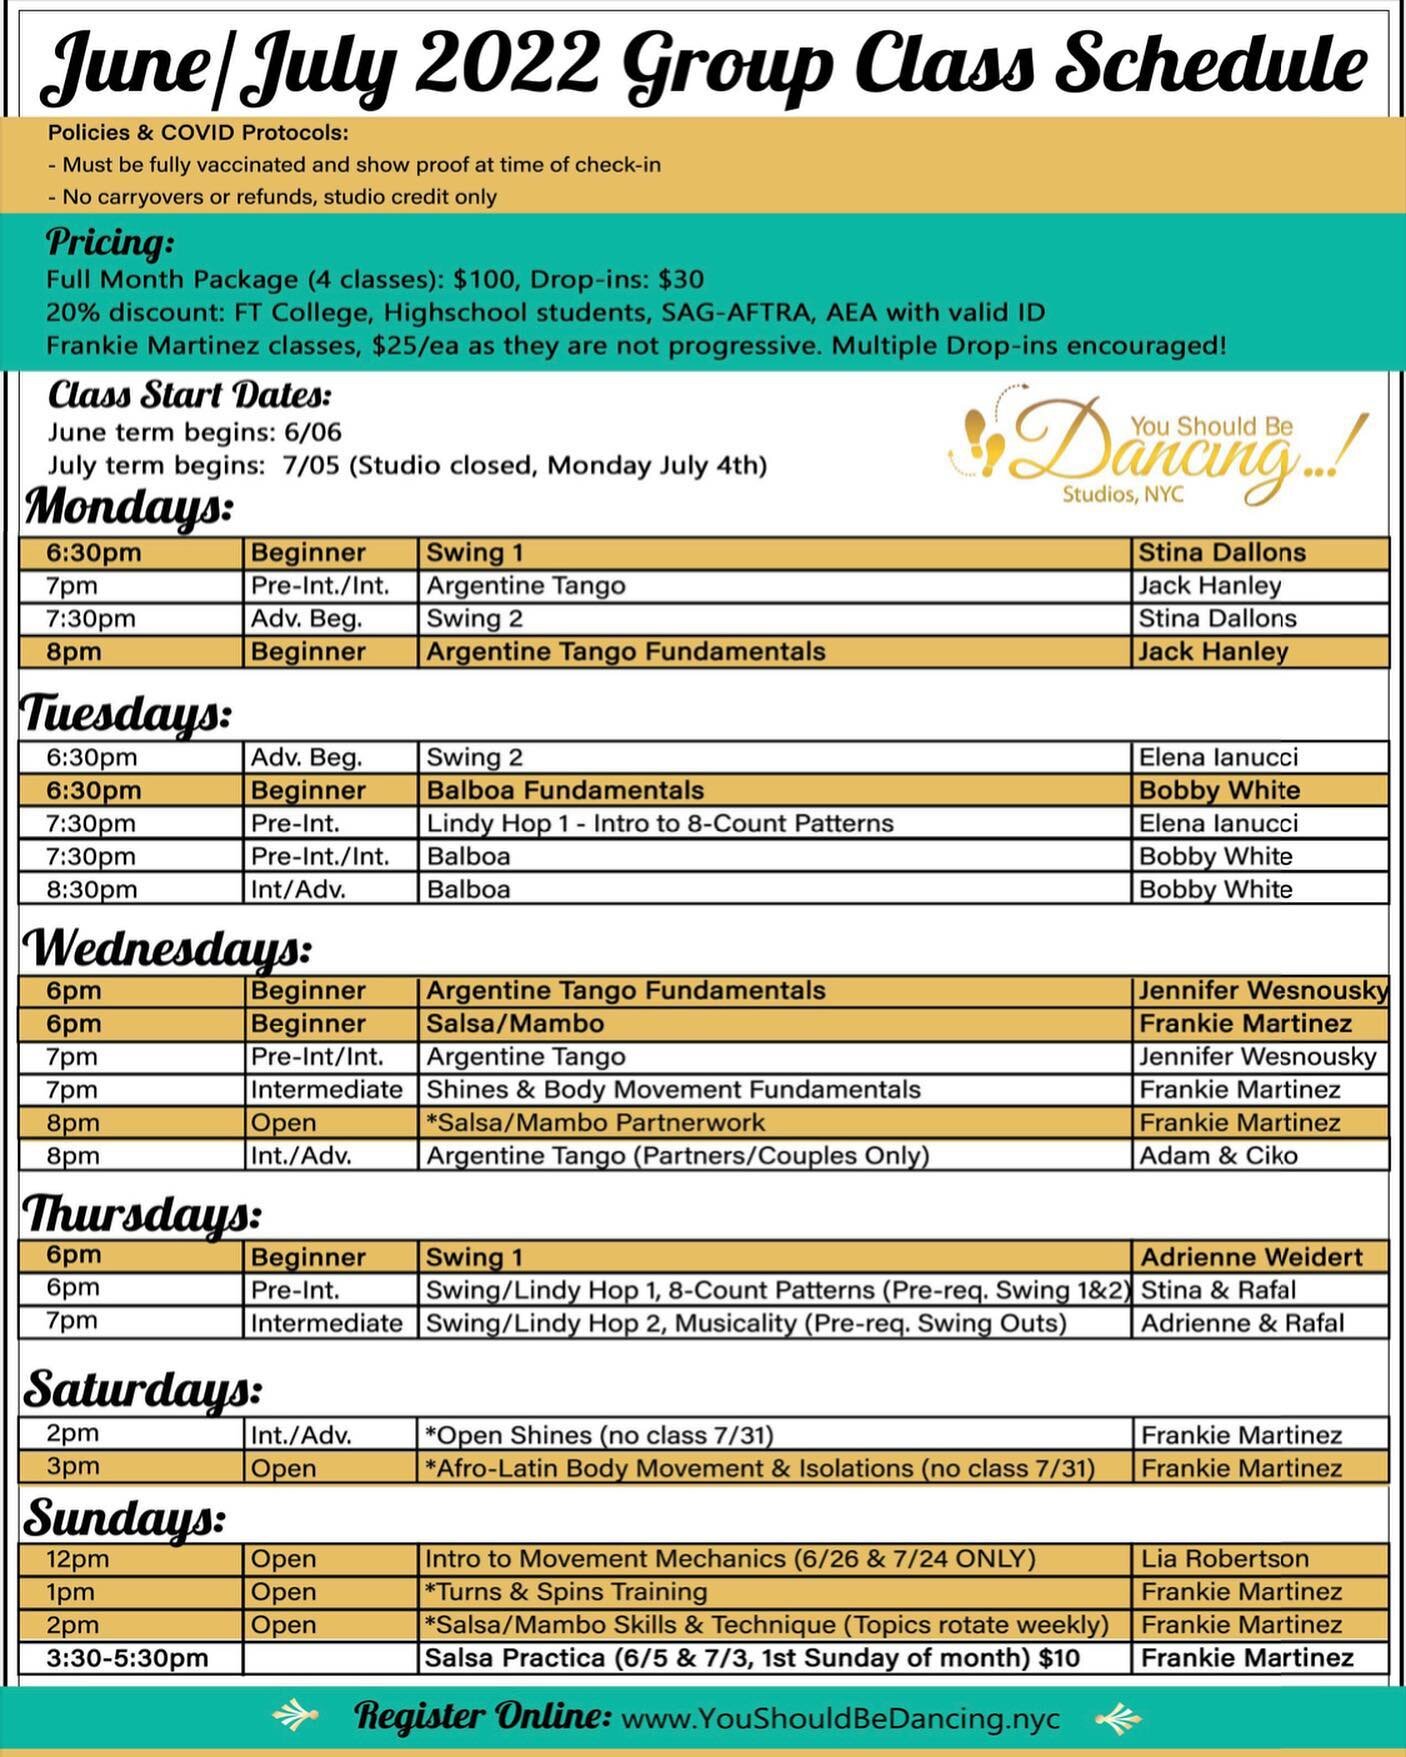 June/July Group Class Schedule is ready&hellip; New term starts next week! 
Link in bio to register. 
#swing 
#salsa
#argentinetango
#balboa
#dancelessons
#dancenyc 
#youshouldbedancing